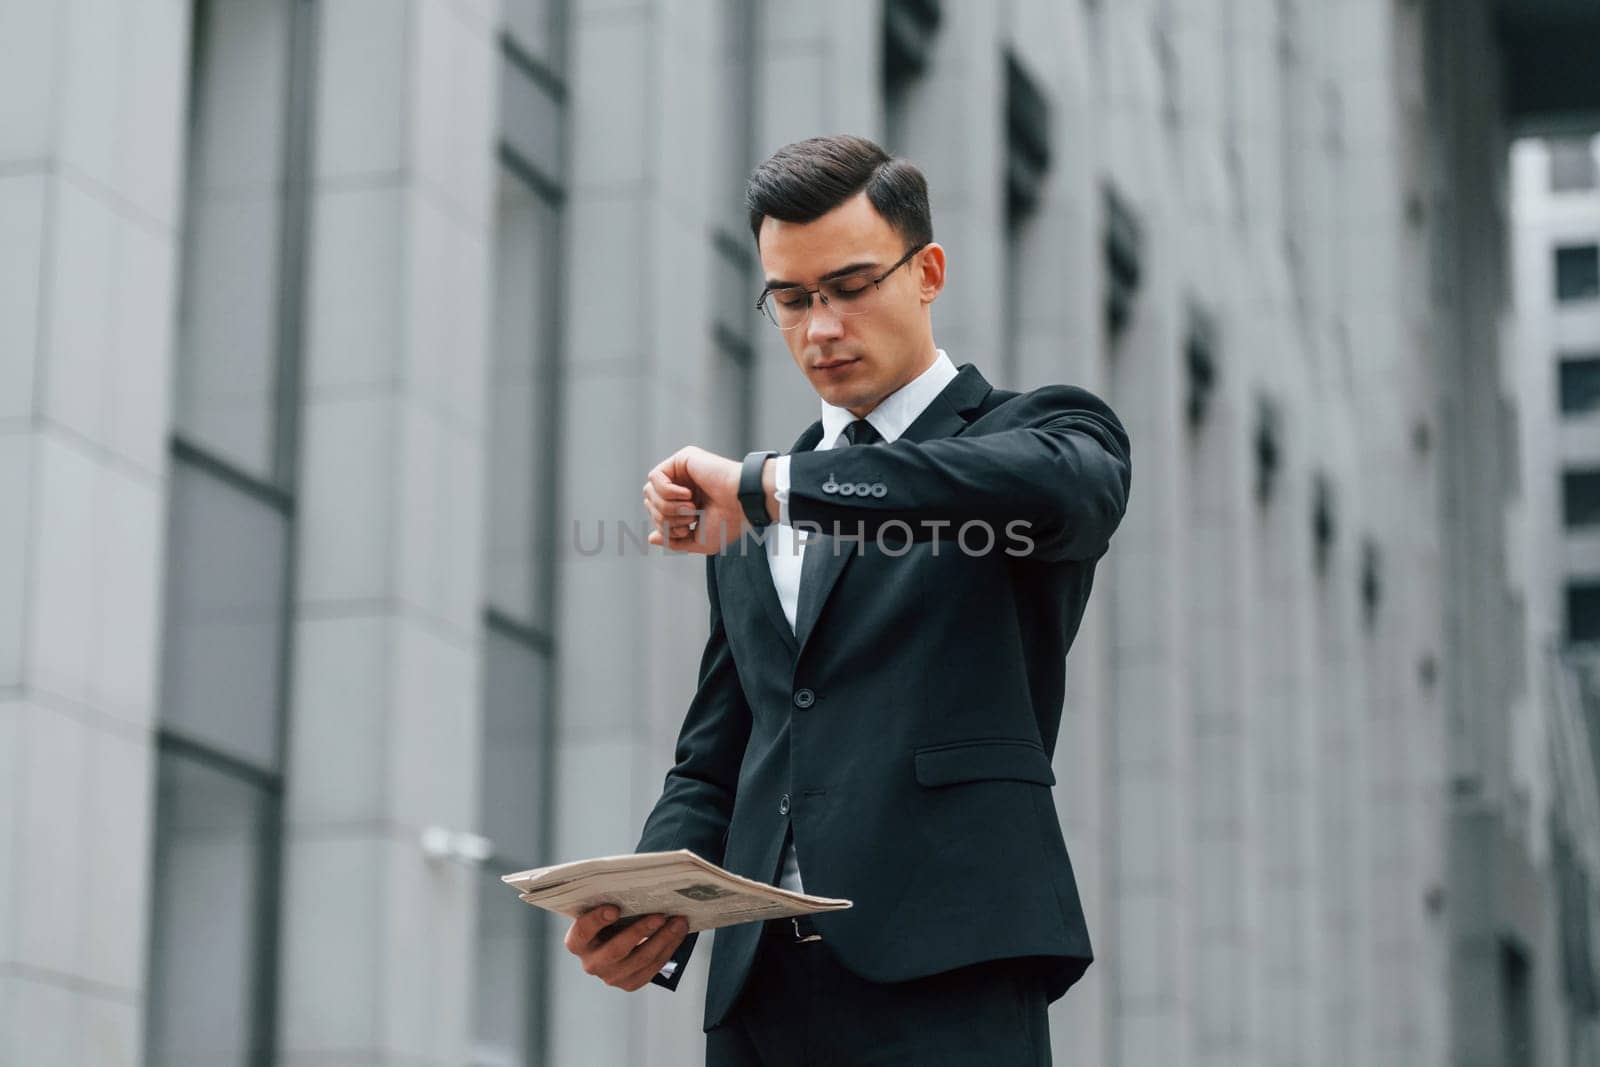 Holding newspaper. Businessman in black suit and tie is outdoors in the city by Standret